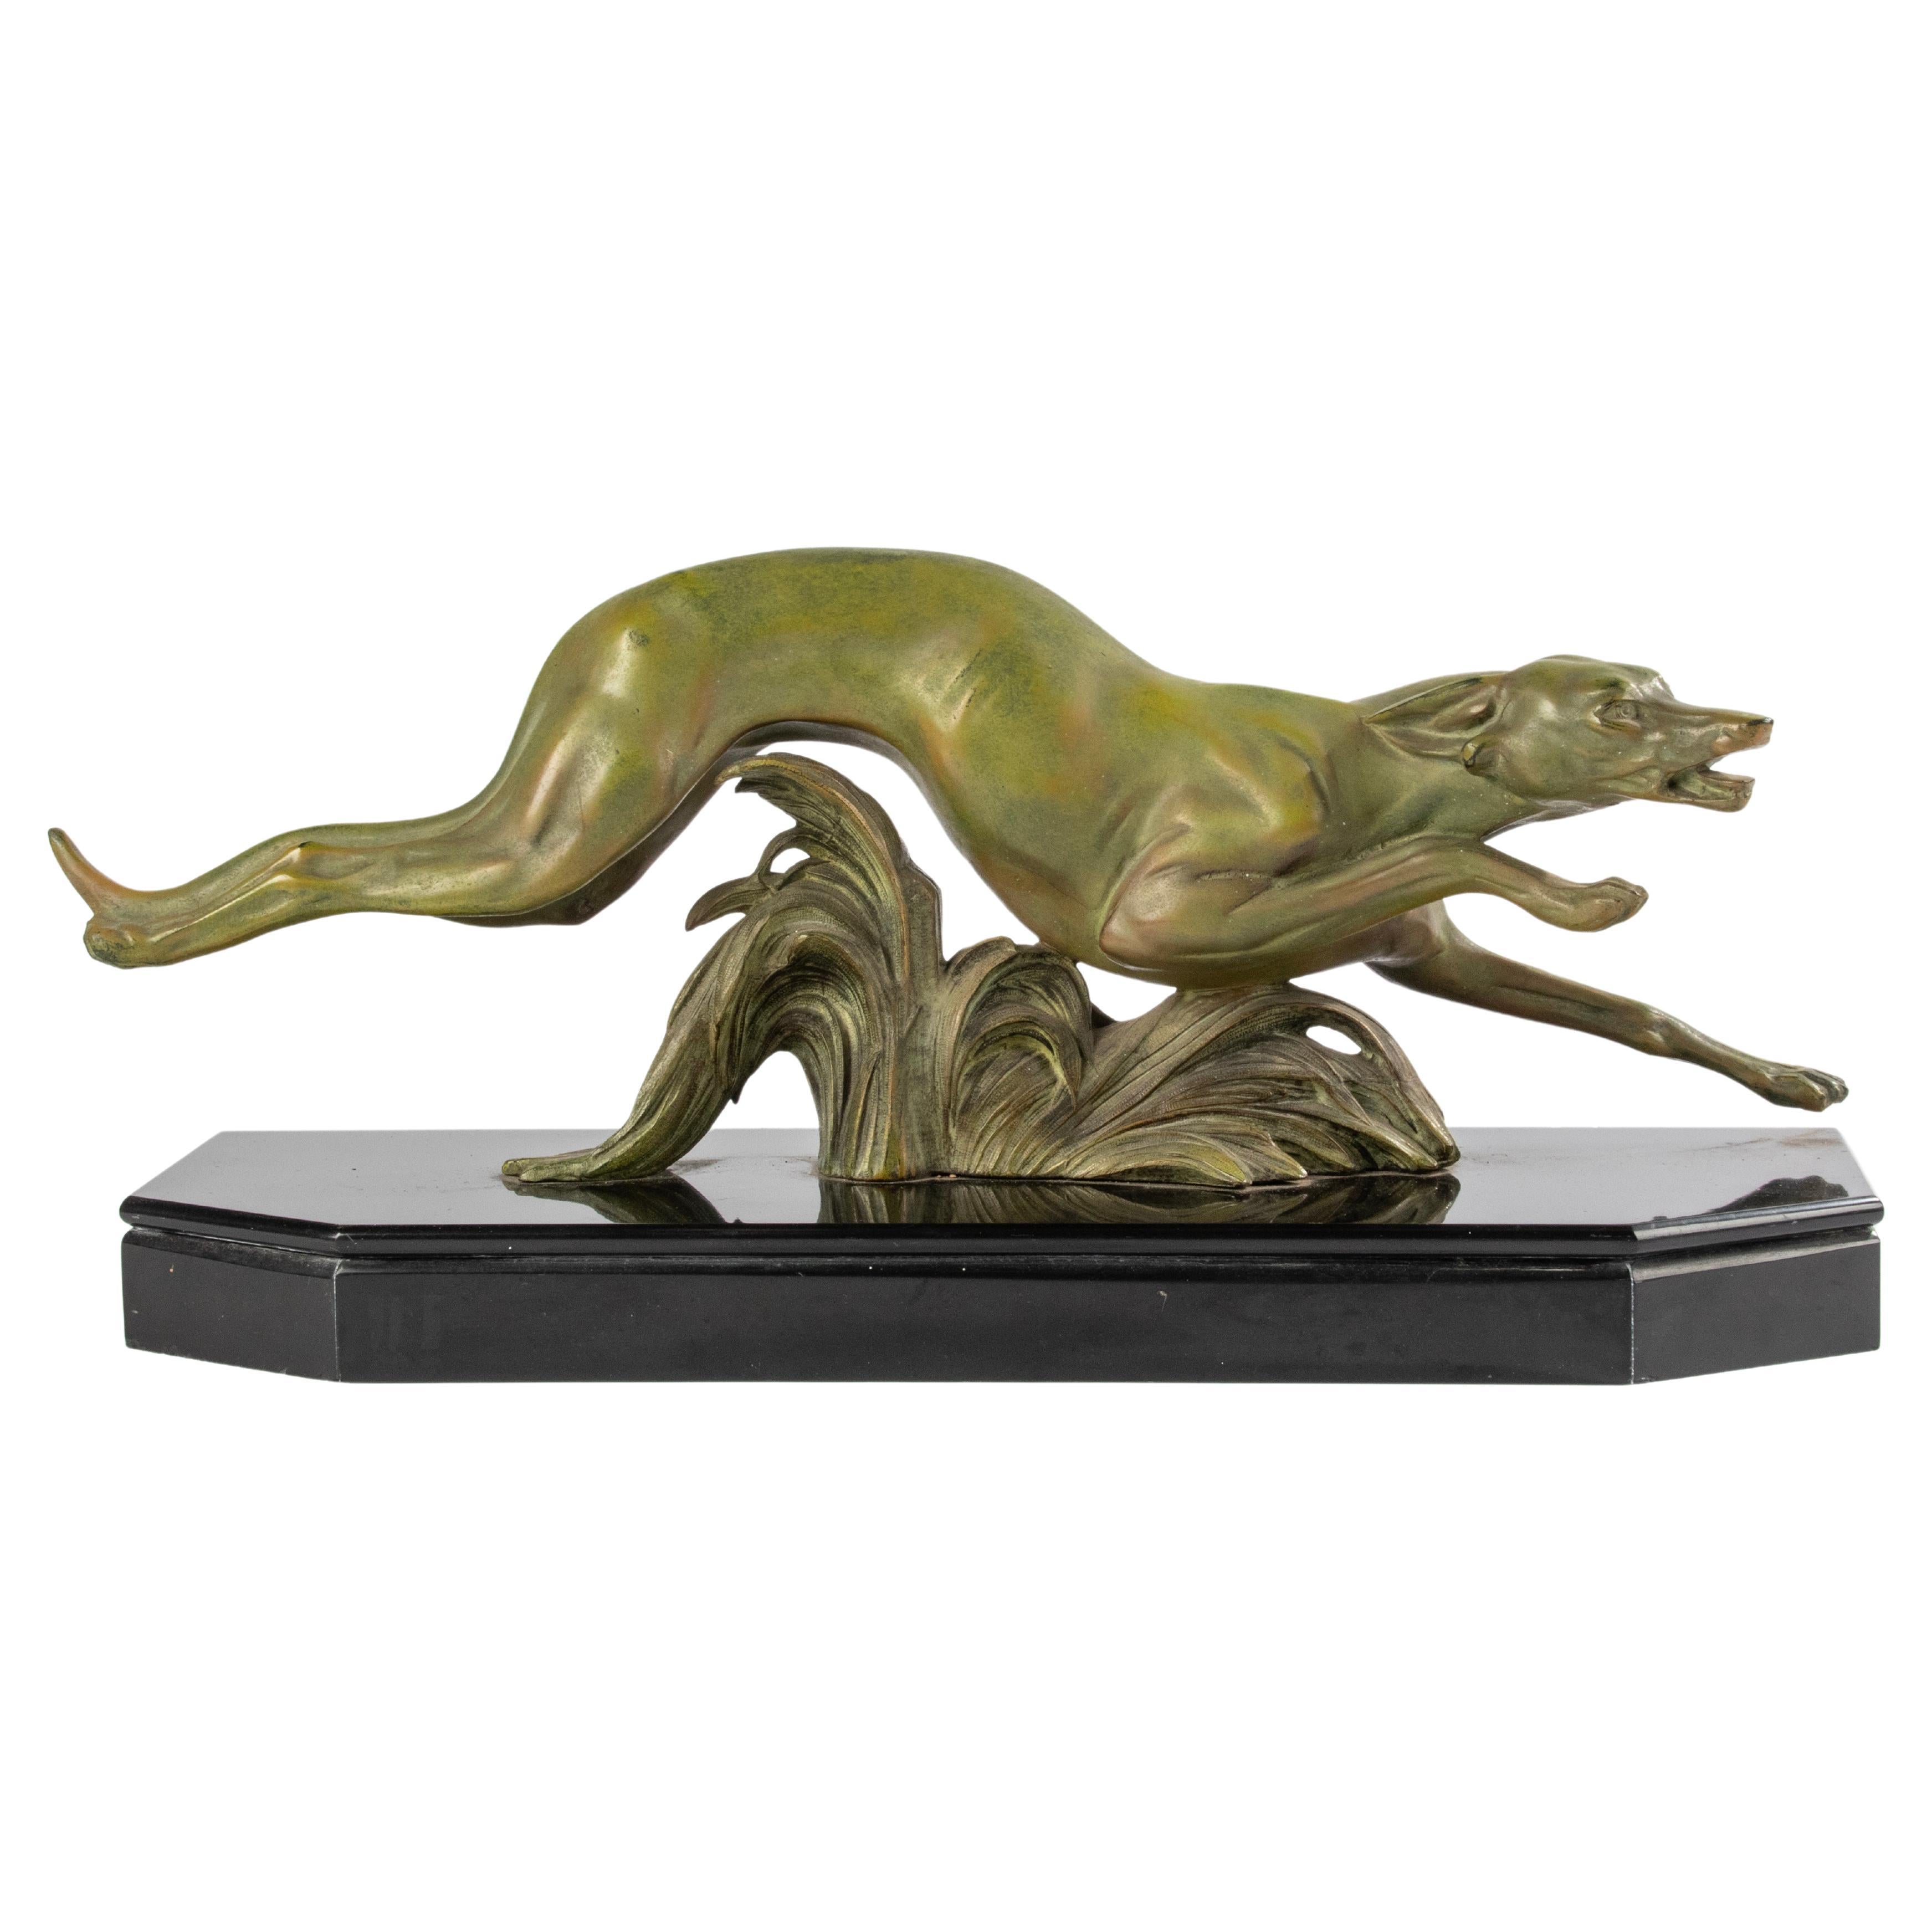 Art Deco Period Patinated Spelter Sculpture Whippet / Greyhound Dog For Sale